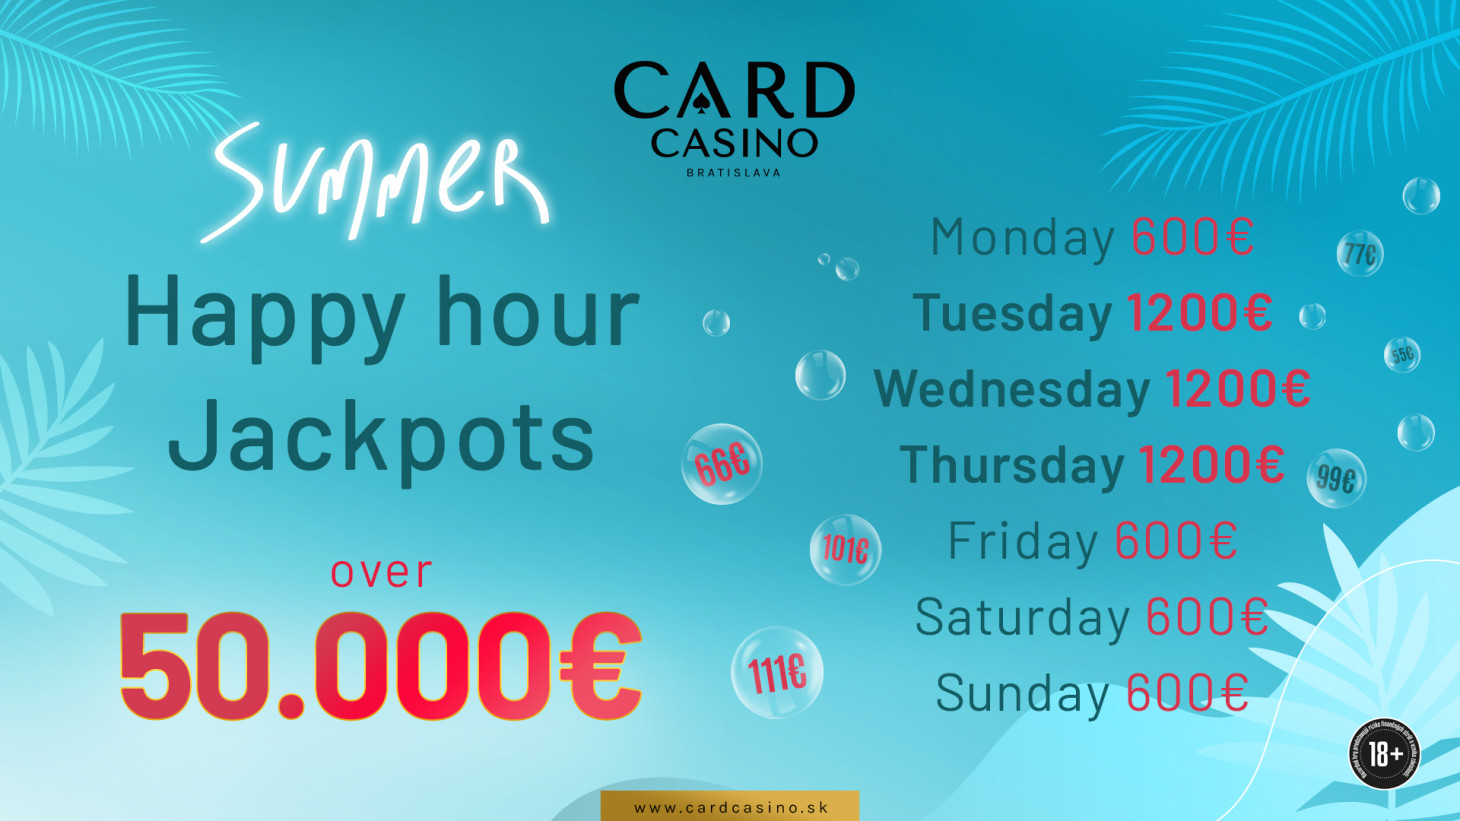 We're giving away over €50,000 in HH Jackpots!